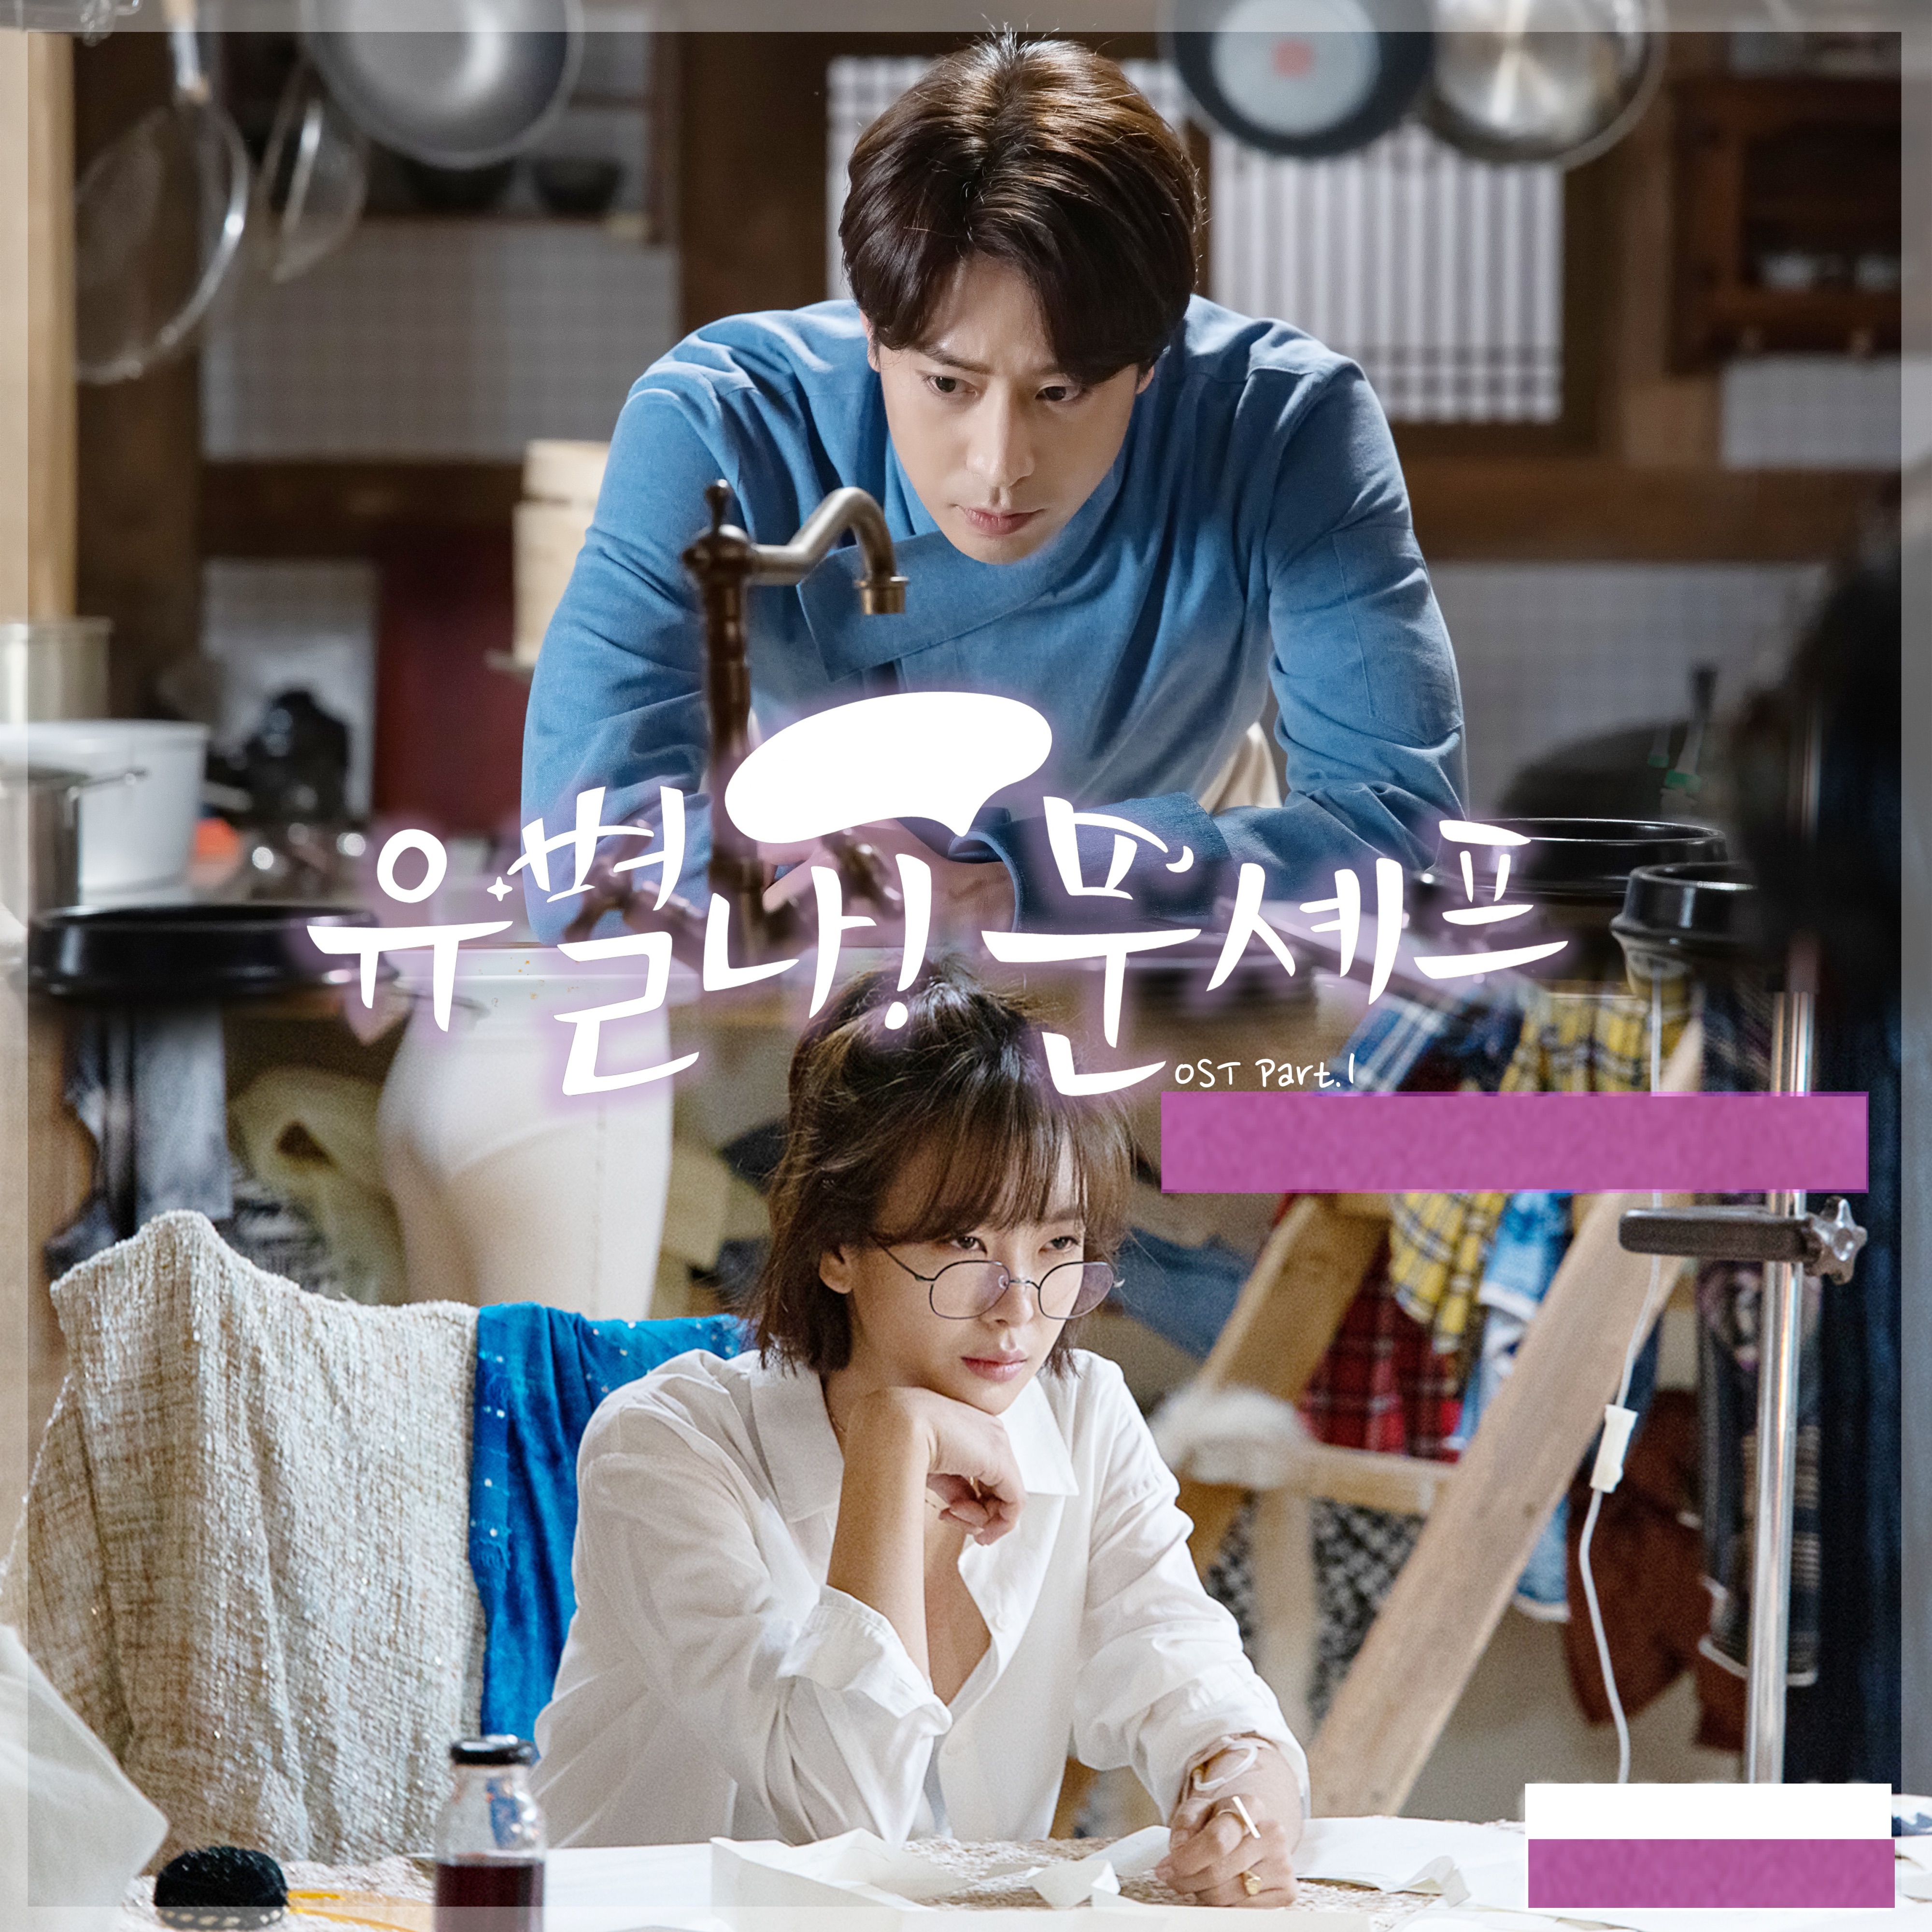 Mooned soundtrack. Love in Contract OST.